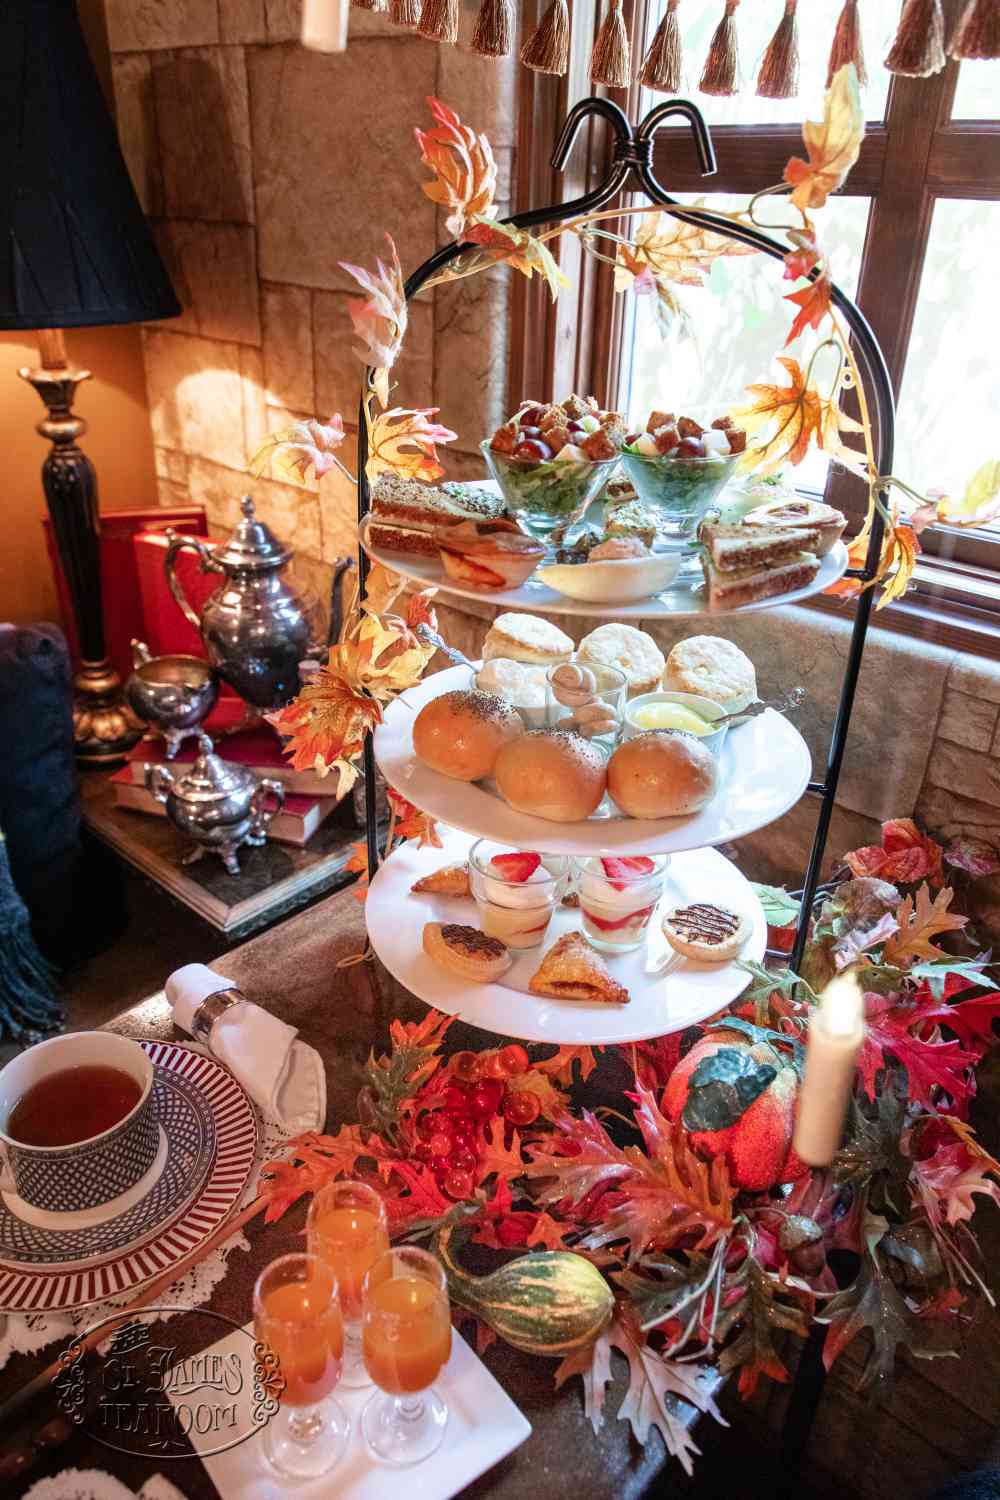 Afternoon Tea Menu - Recipes from the World of Wizards - Dine in Food Tray for 3